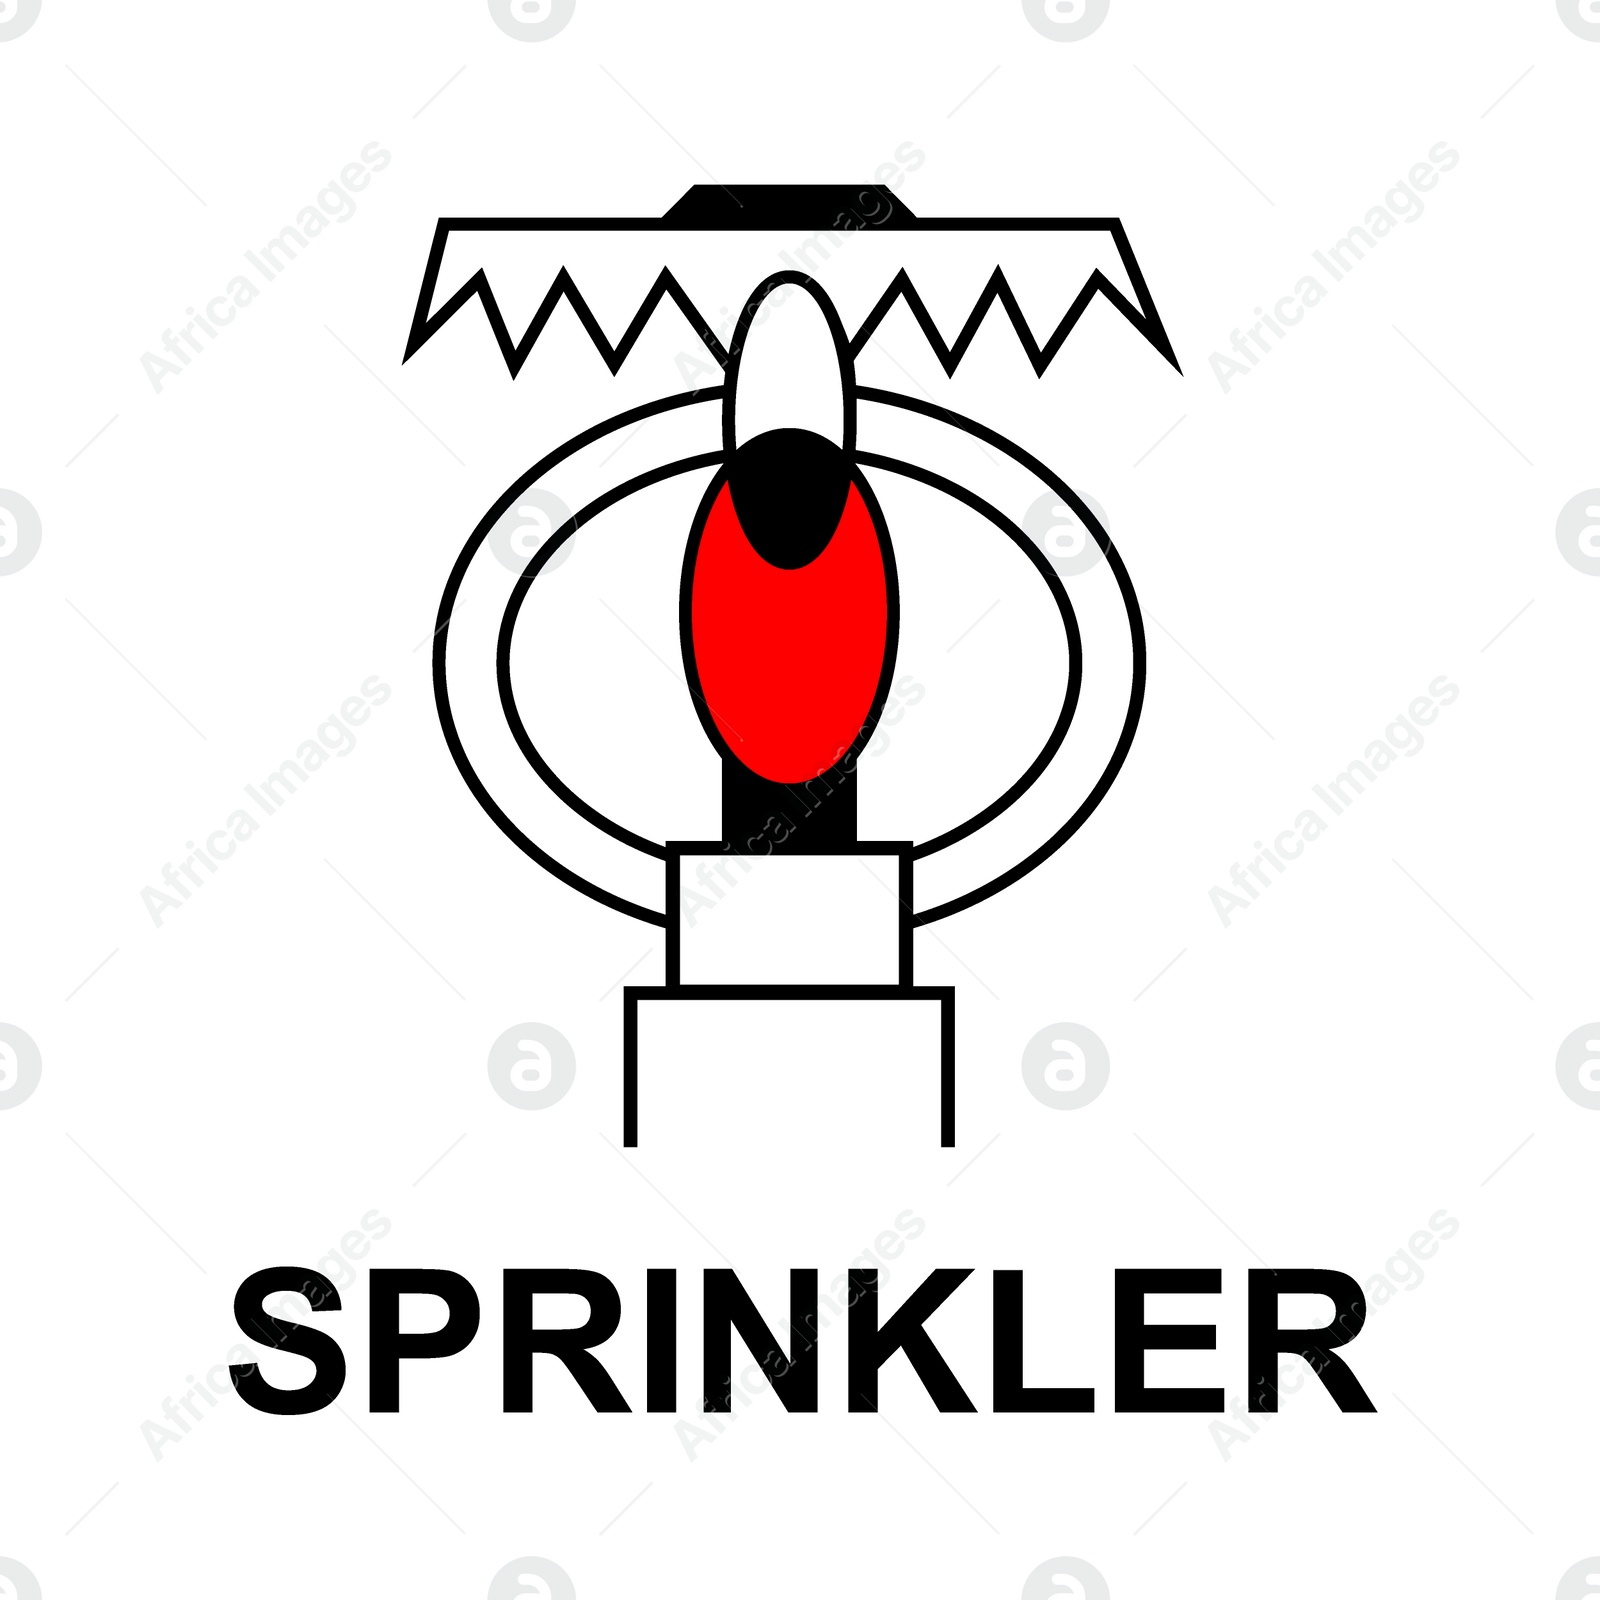 Image of International Maritime Organization (IMO) sign, illustration. Space protected by sprinkler